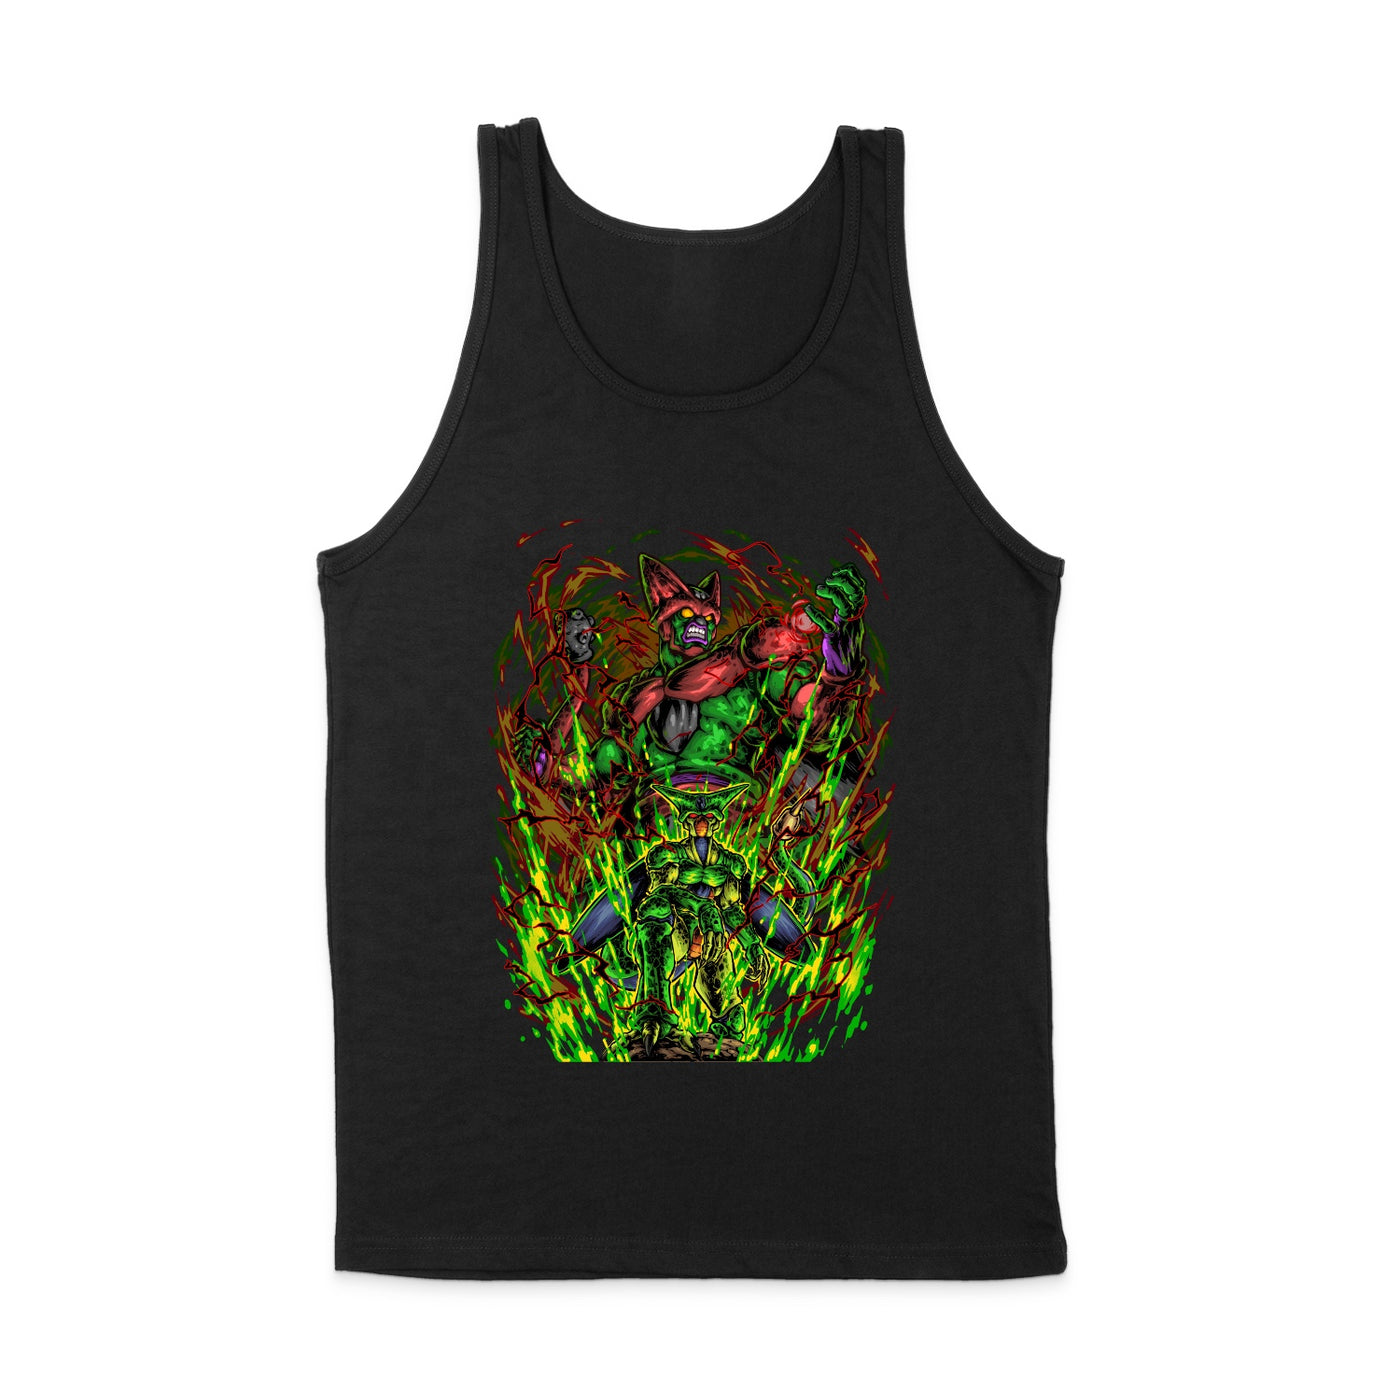 Cell’s Potential | Tank Top